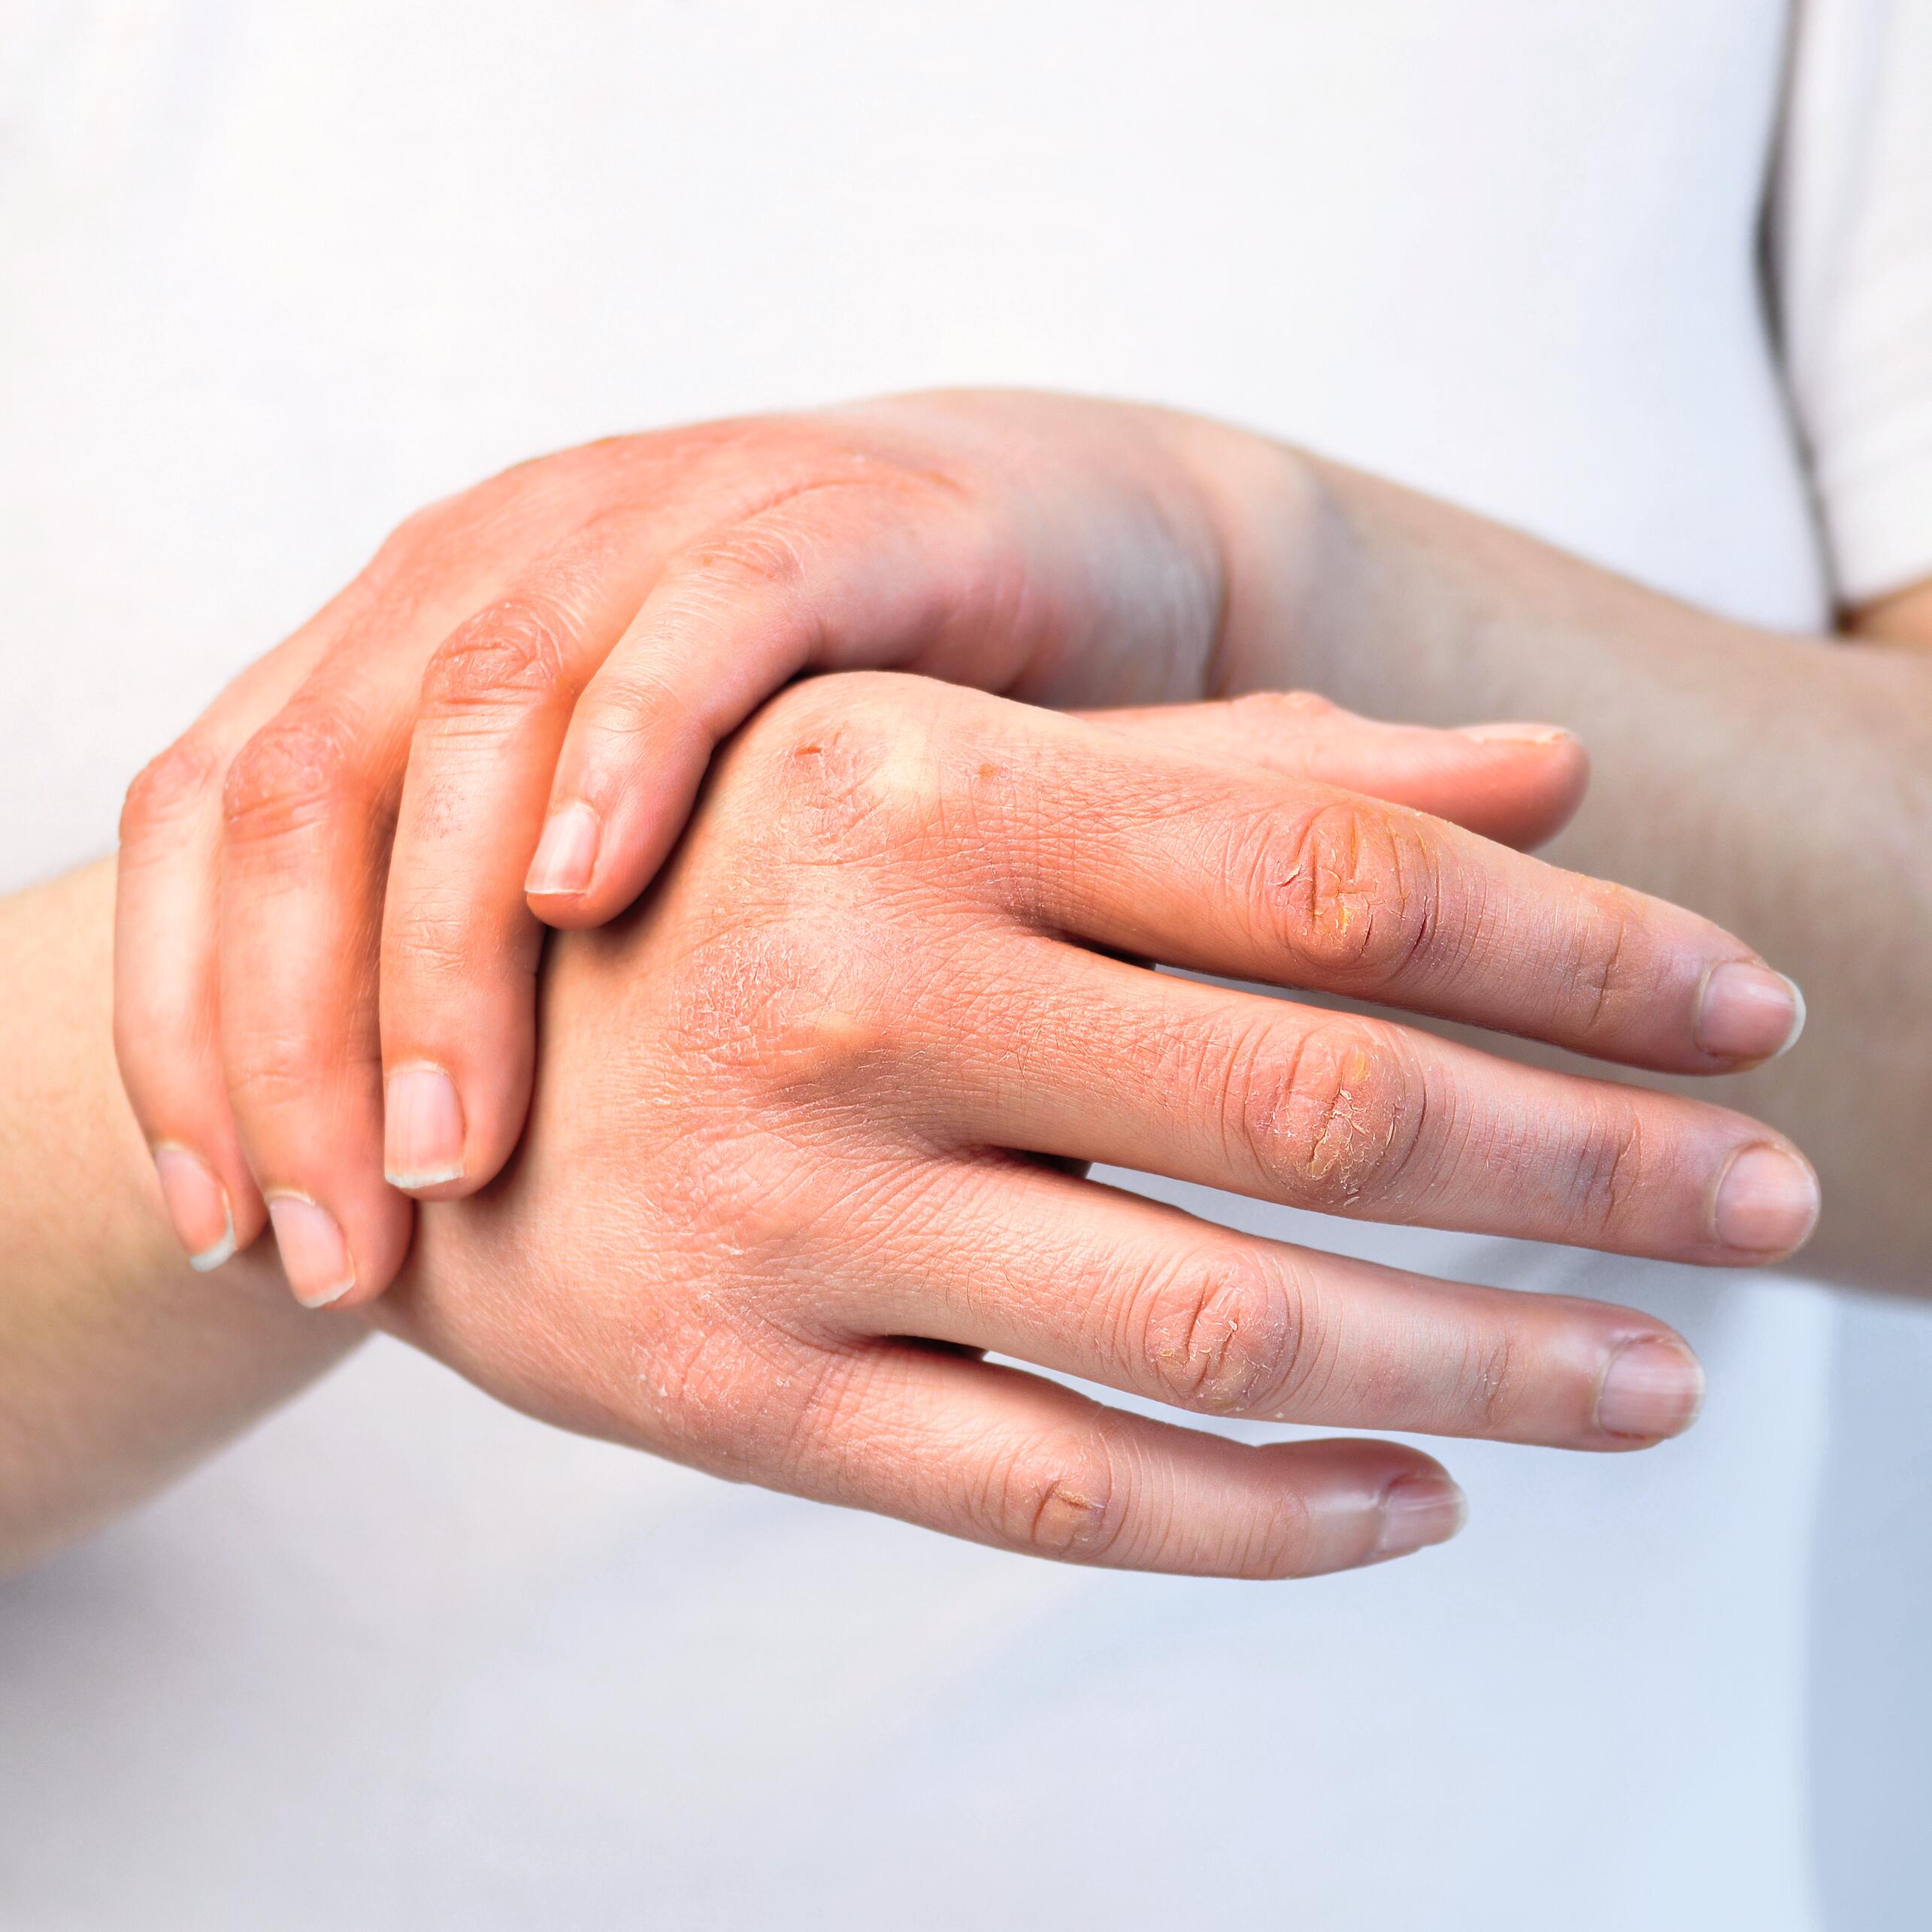 AD_IRRITATIONS_RED-HANDS_LARGE_2021 492x492